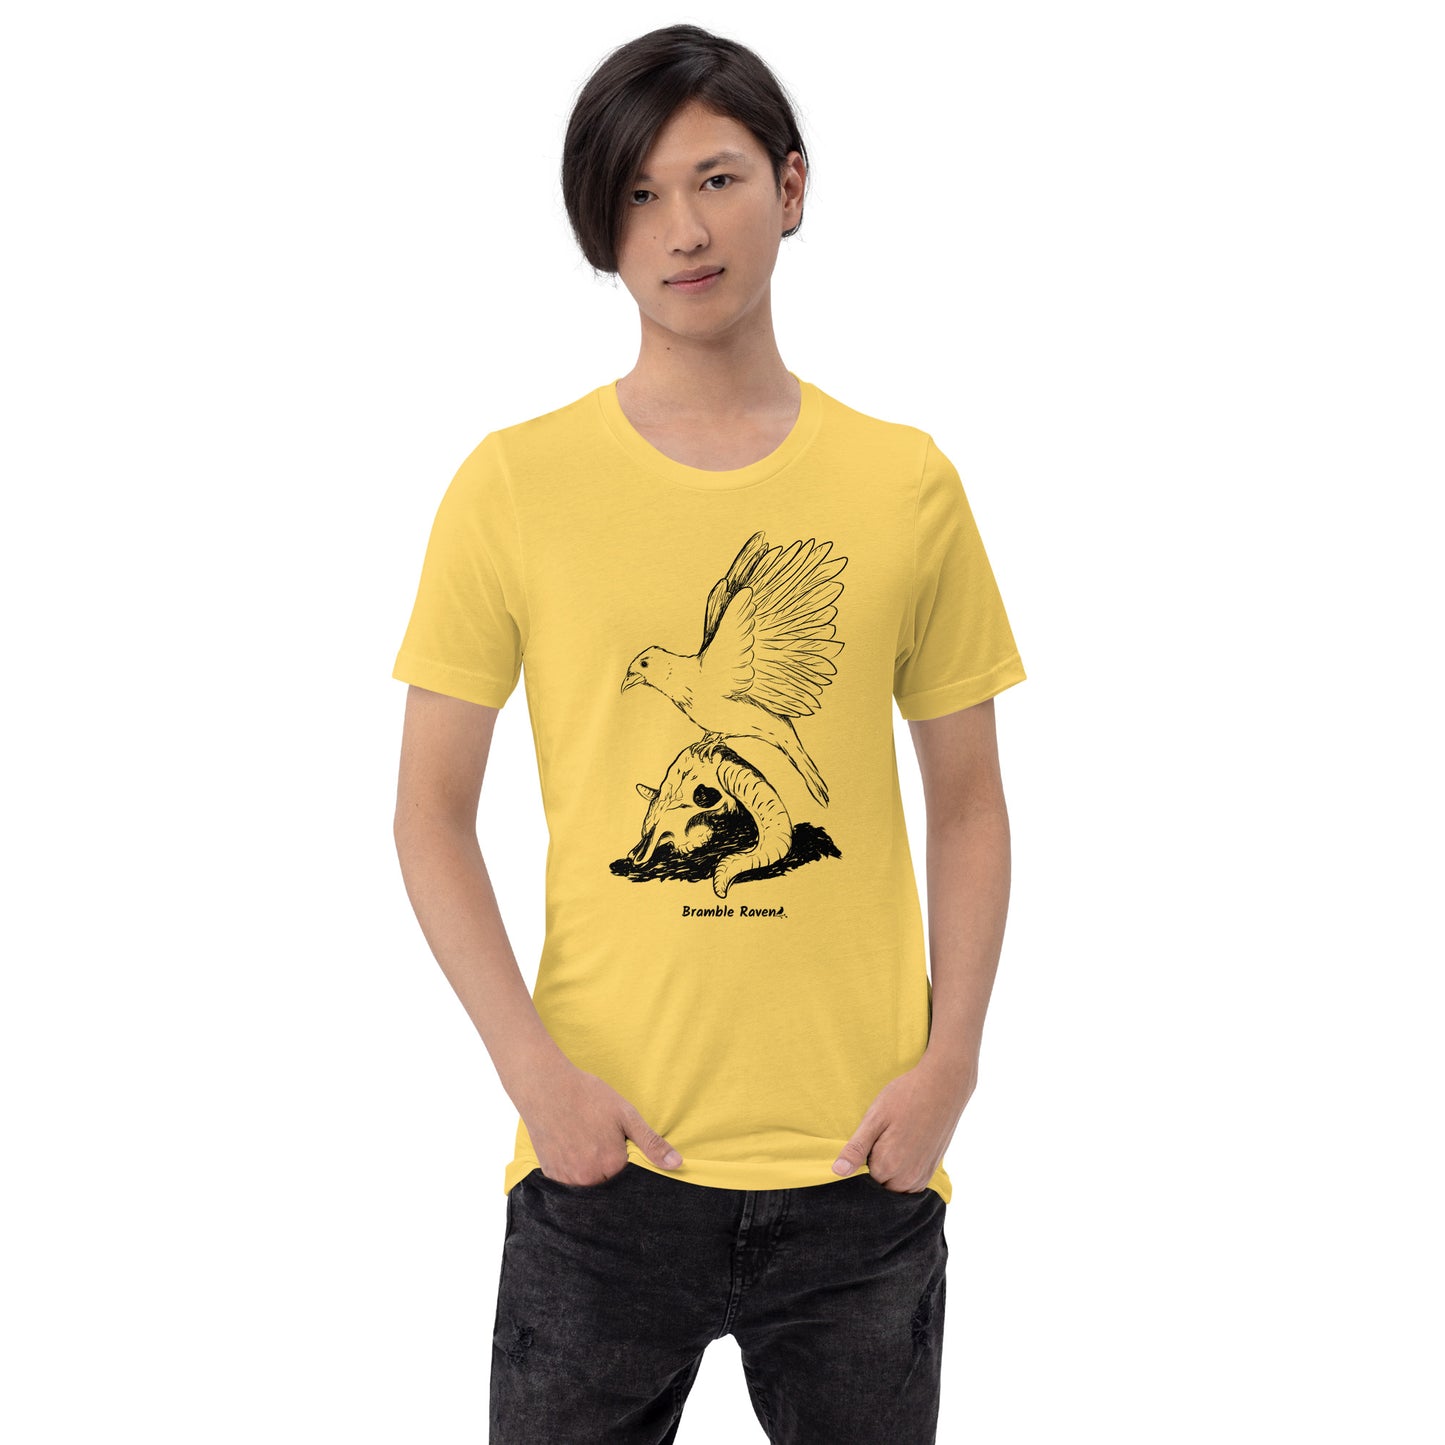 Yellow colored unisex t-shirt. Features Reflections illustration of a crow with wings outstretched sitting on a sheep skull. Shown on male model.